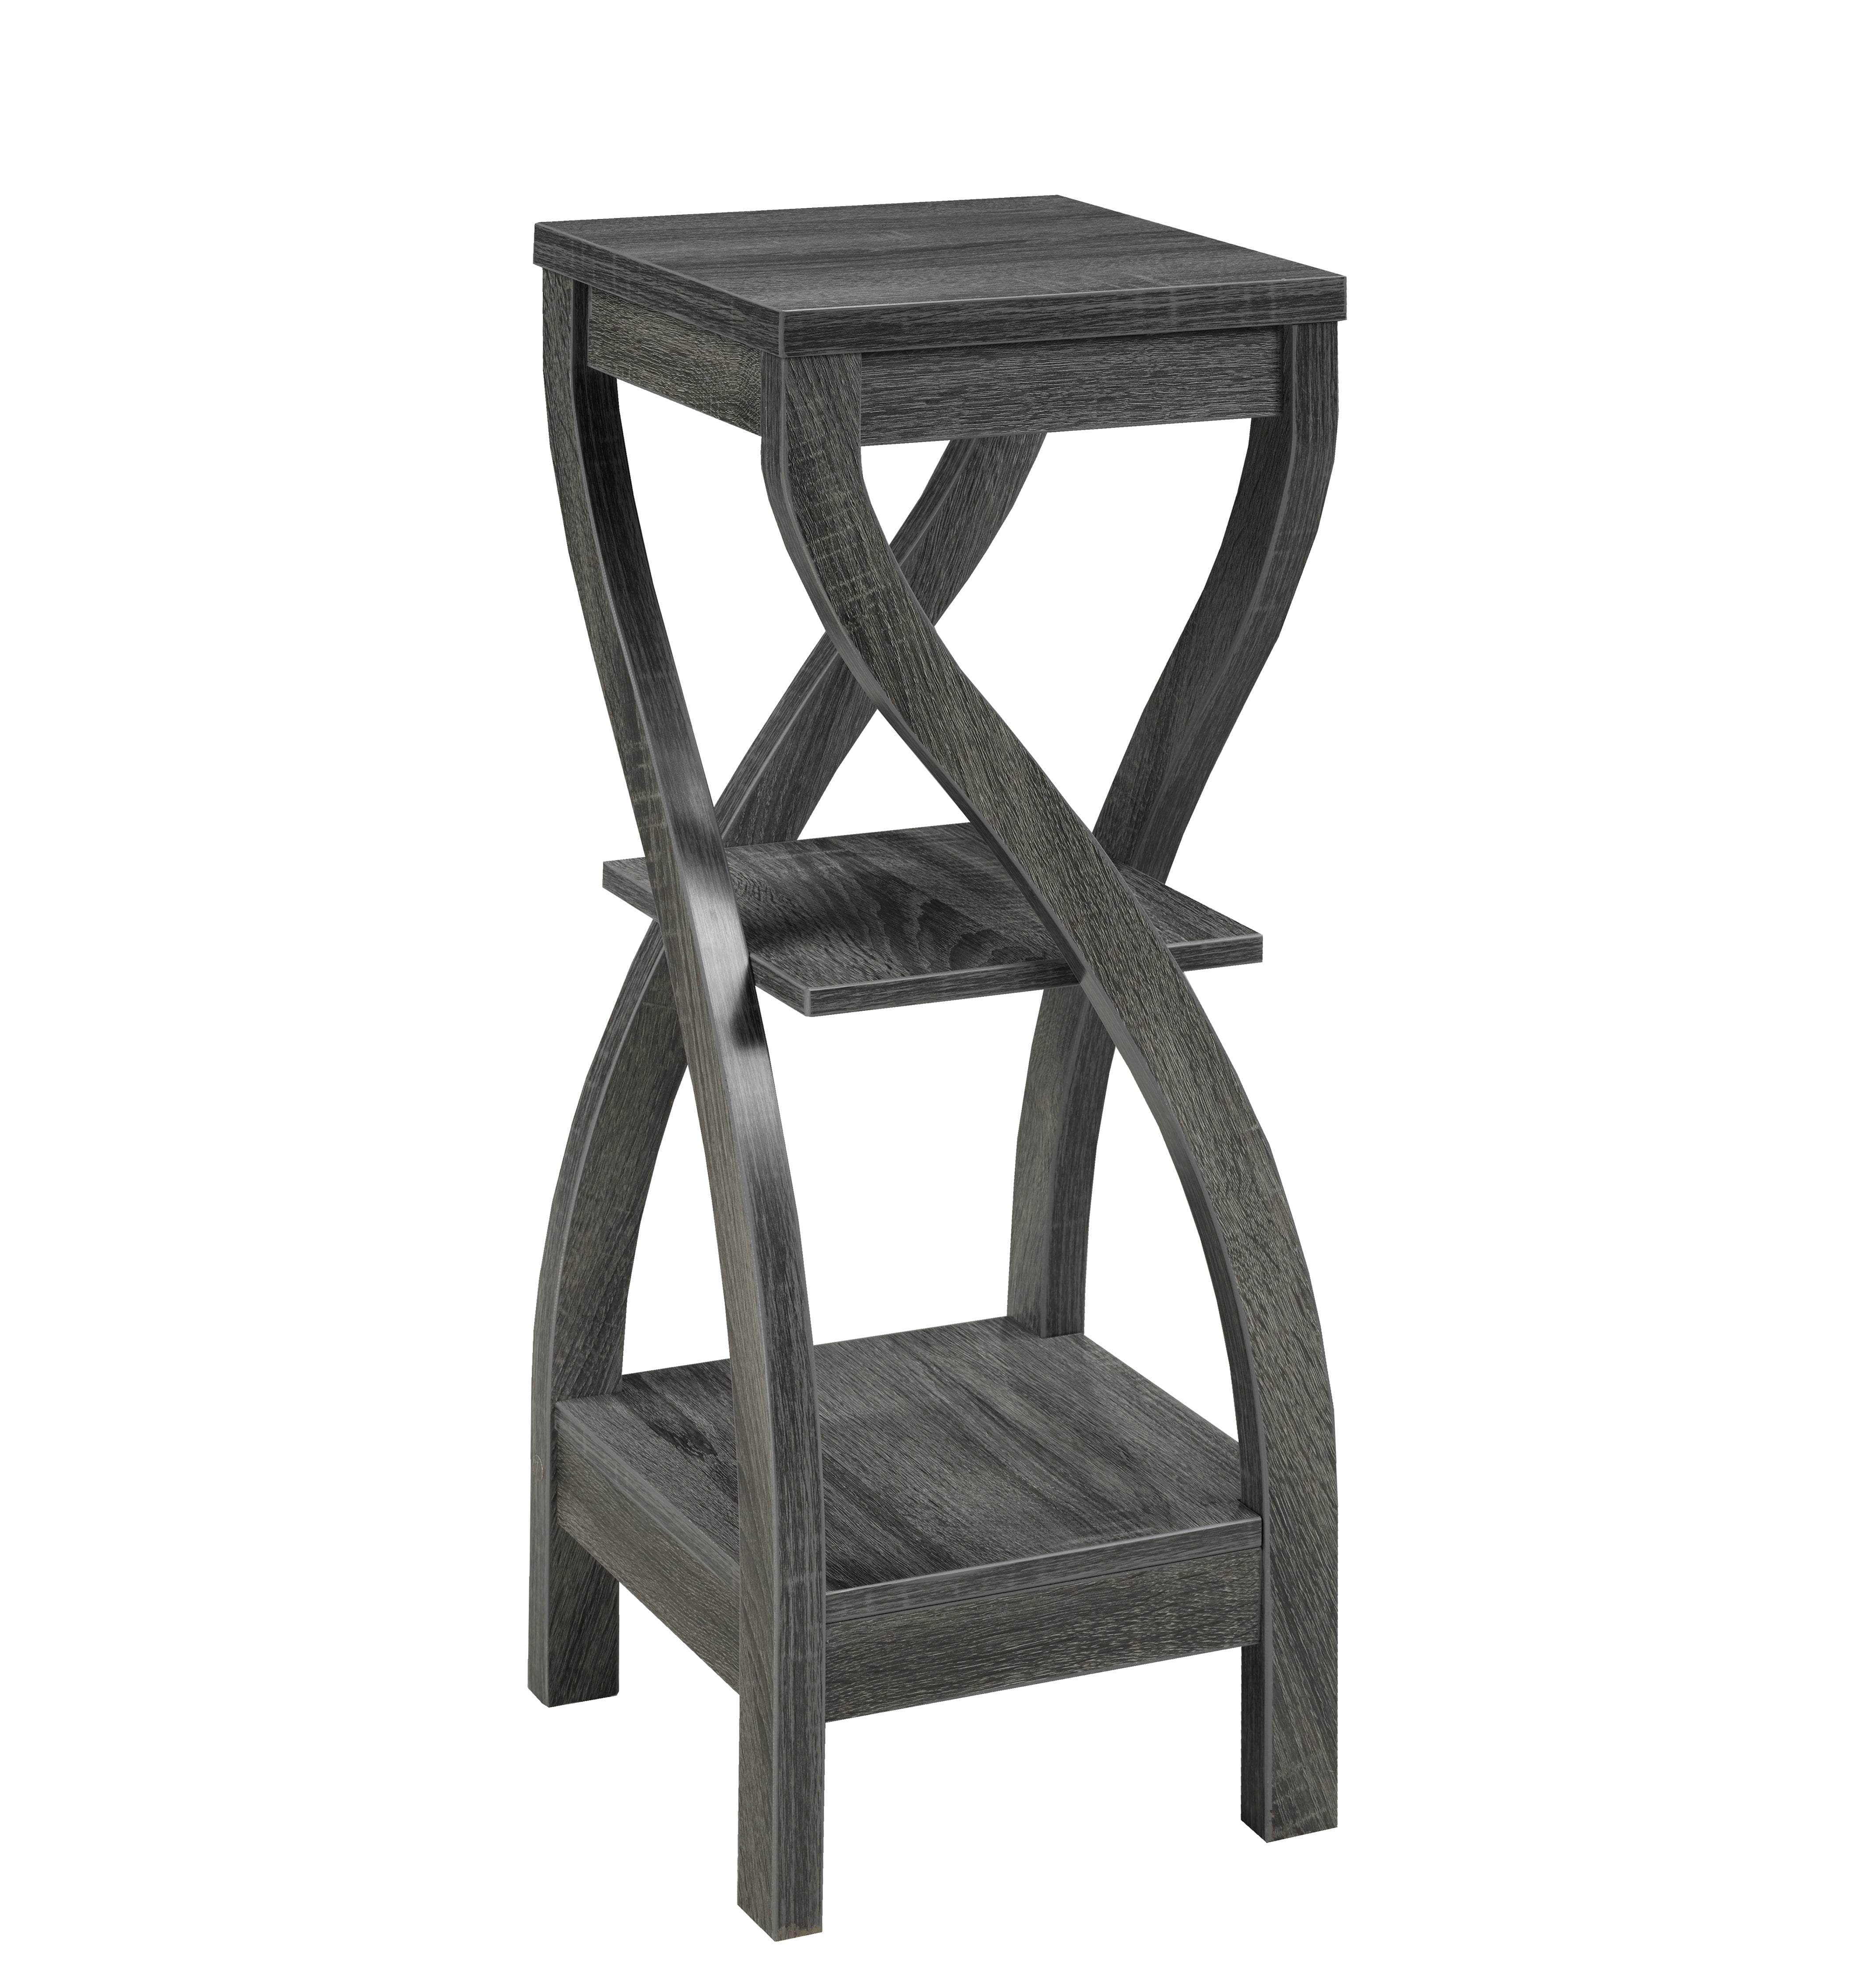 Brassex Inc Aden Modern Square Plant Stand Table In Grey Urban Cali 